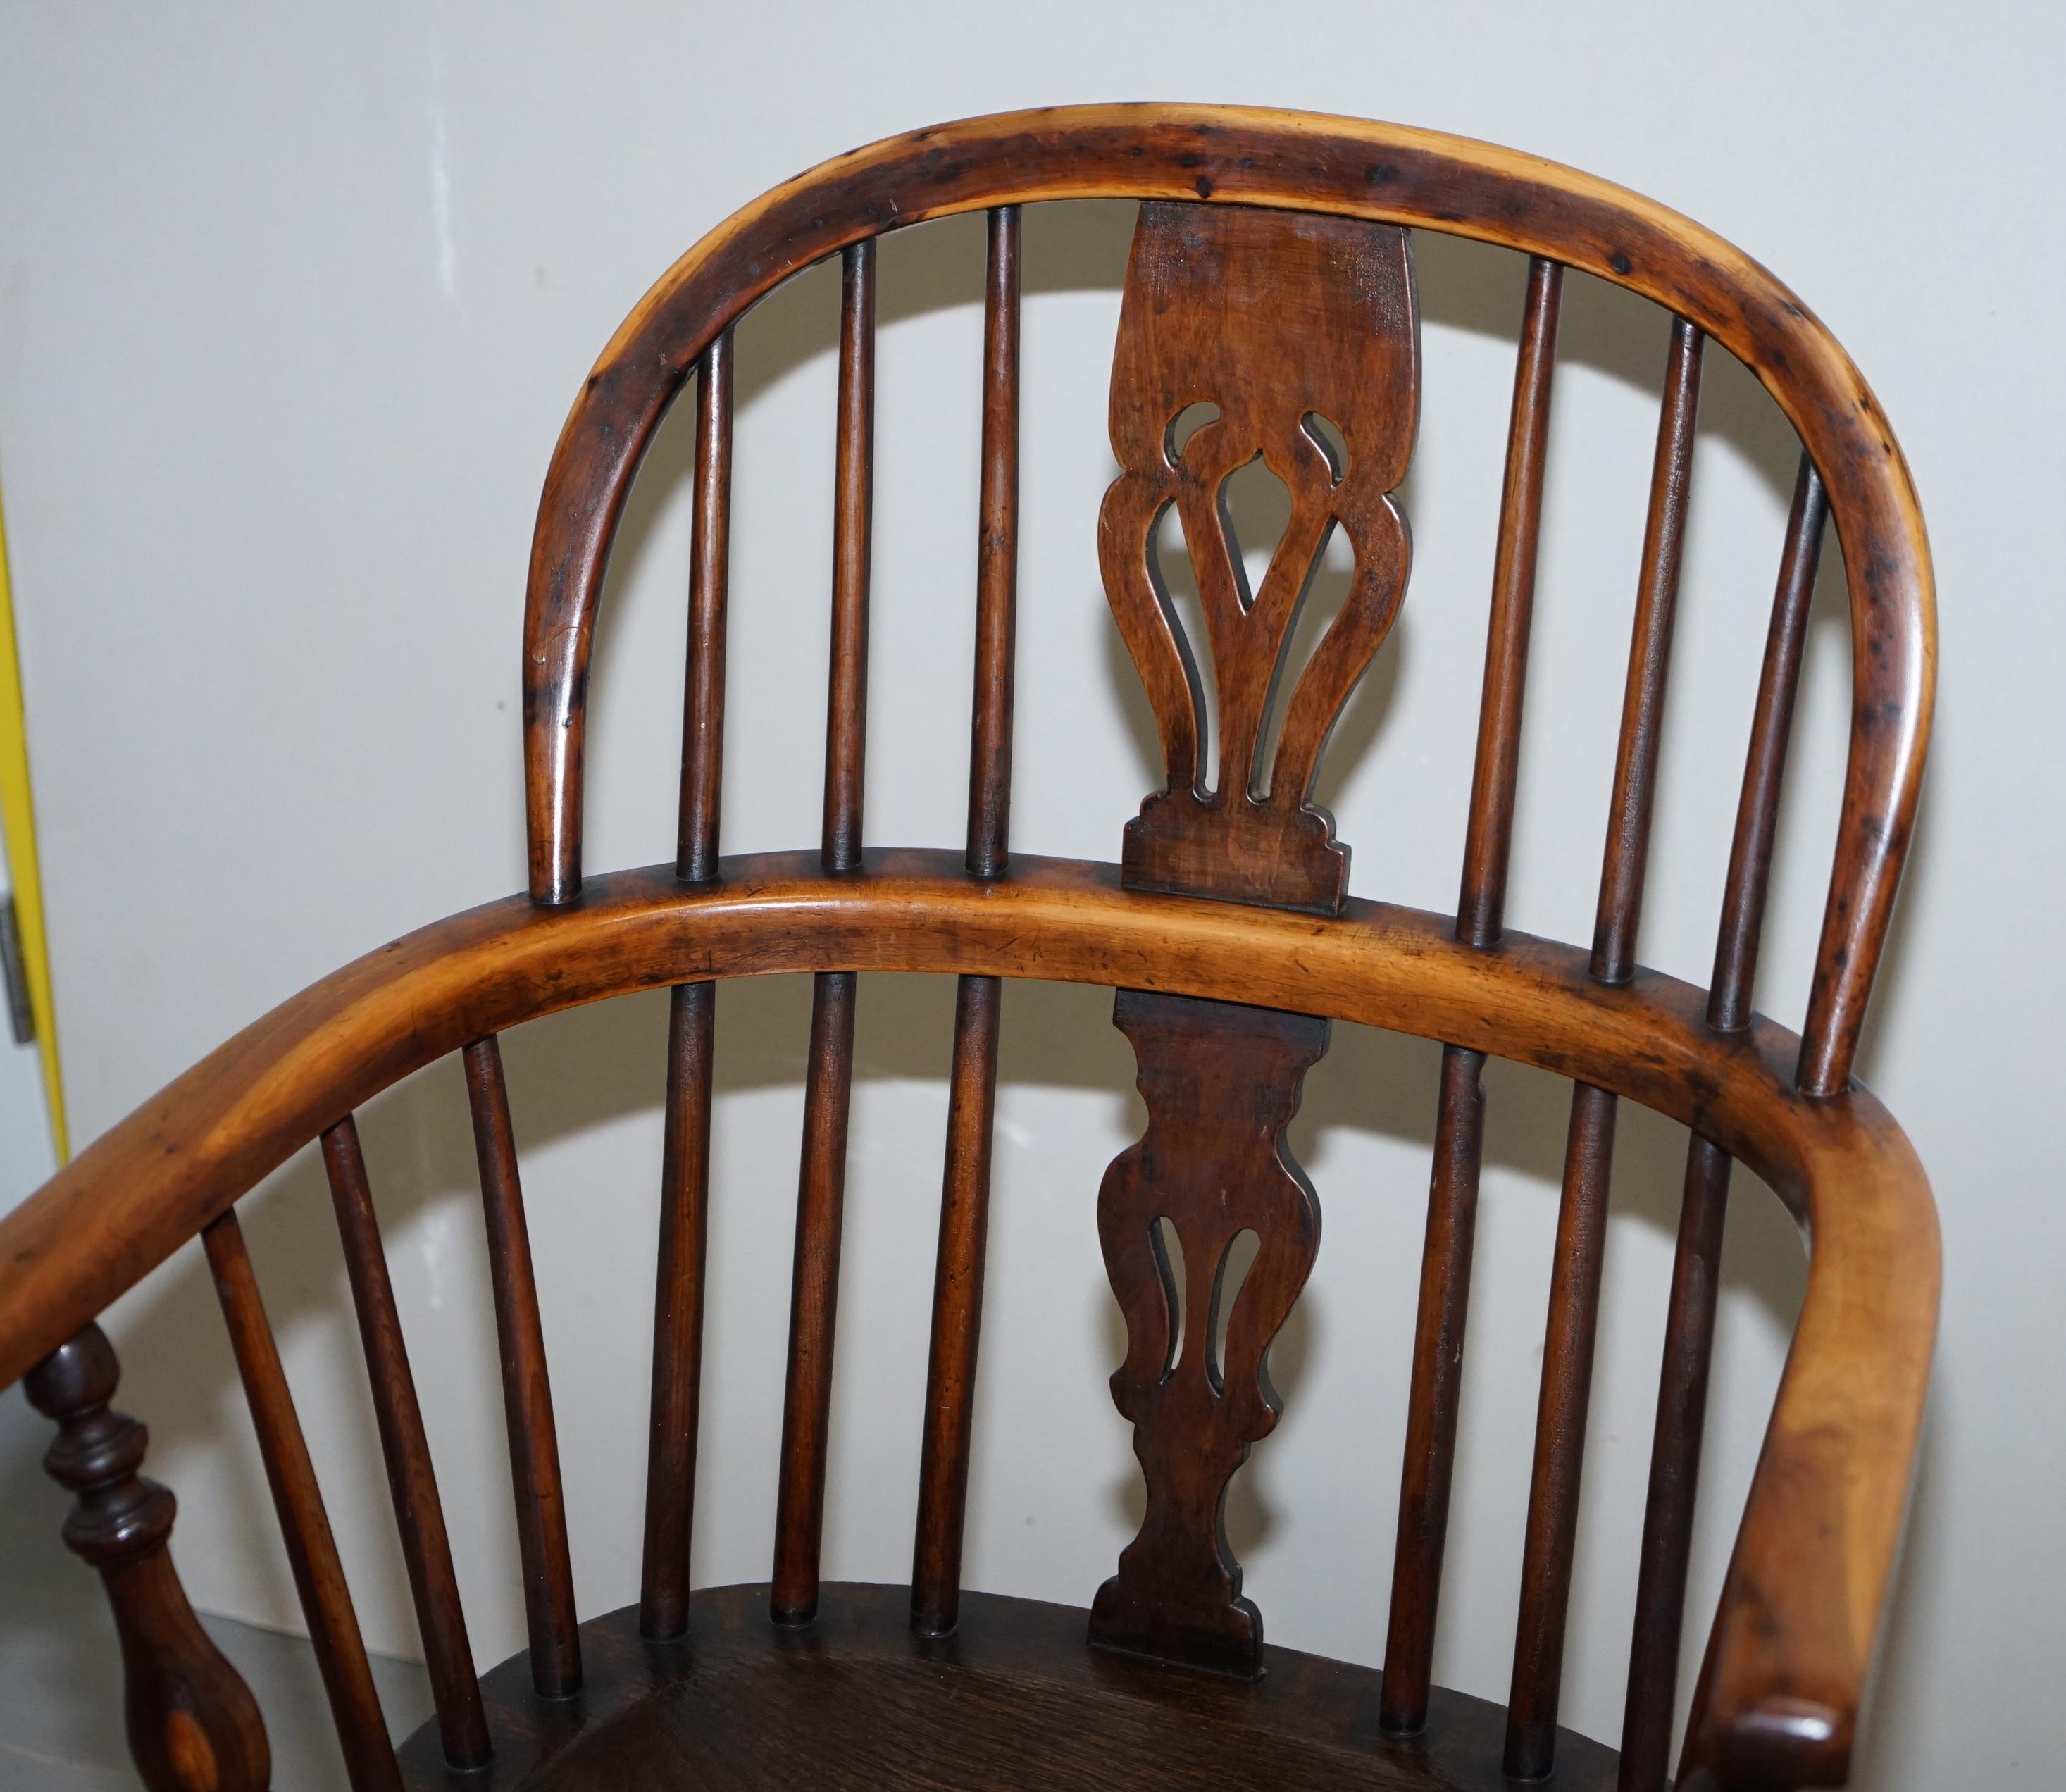 Pair of Burr Yew Wood and Elm Windsor Armchairs circa 1860 English Country House For Sale 8